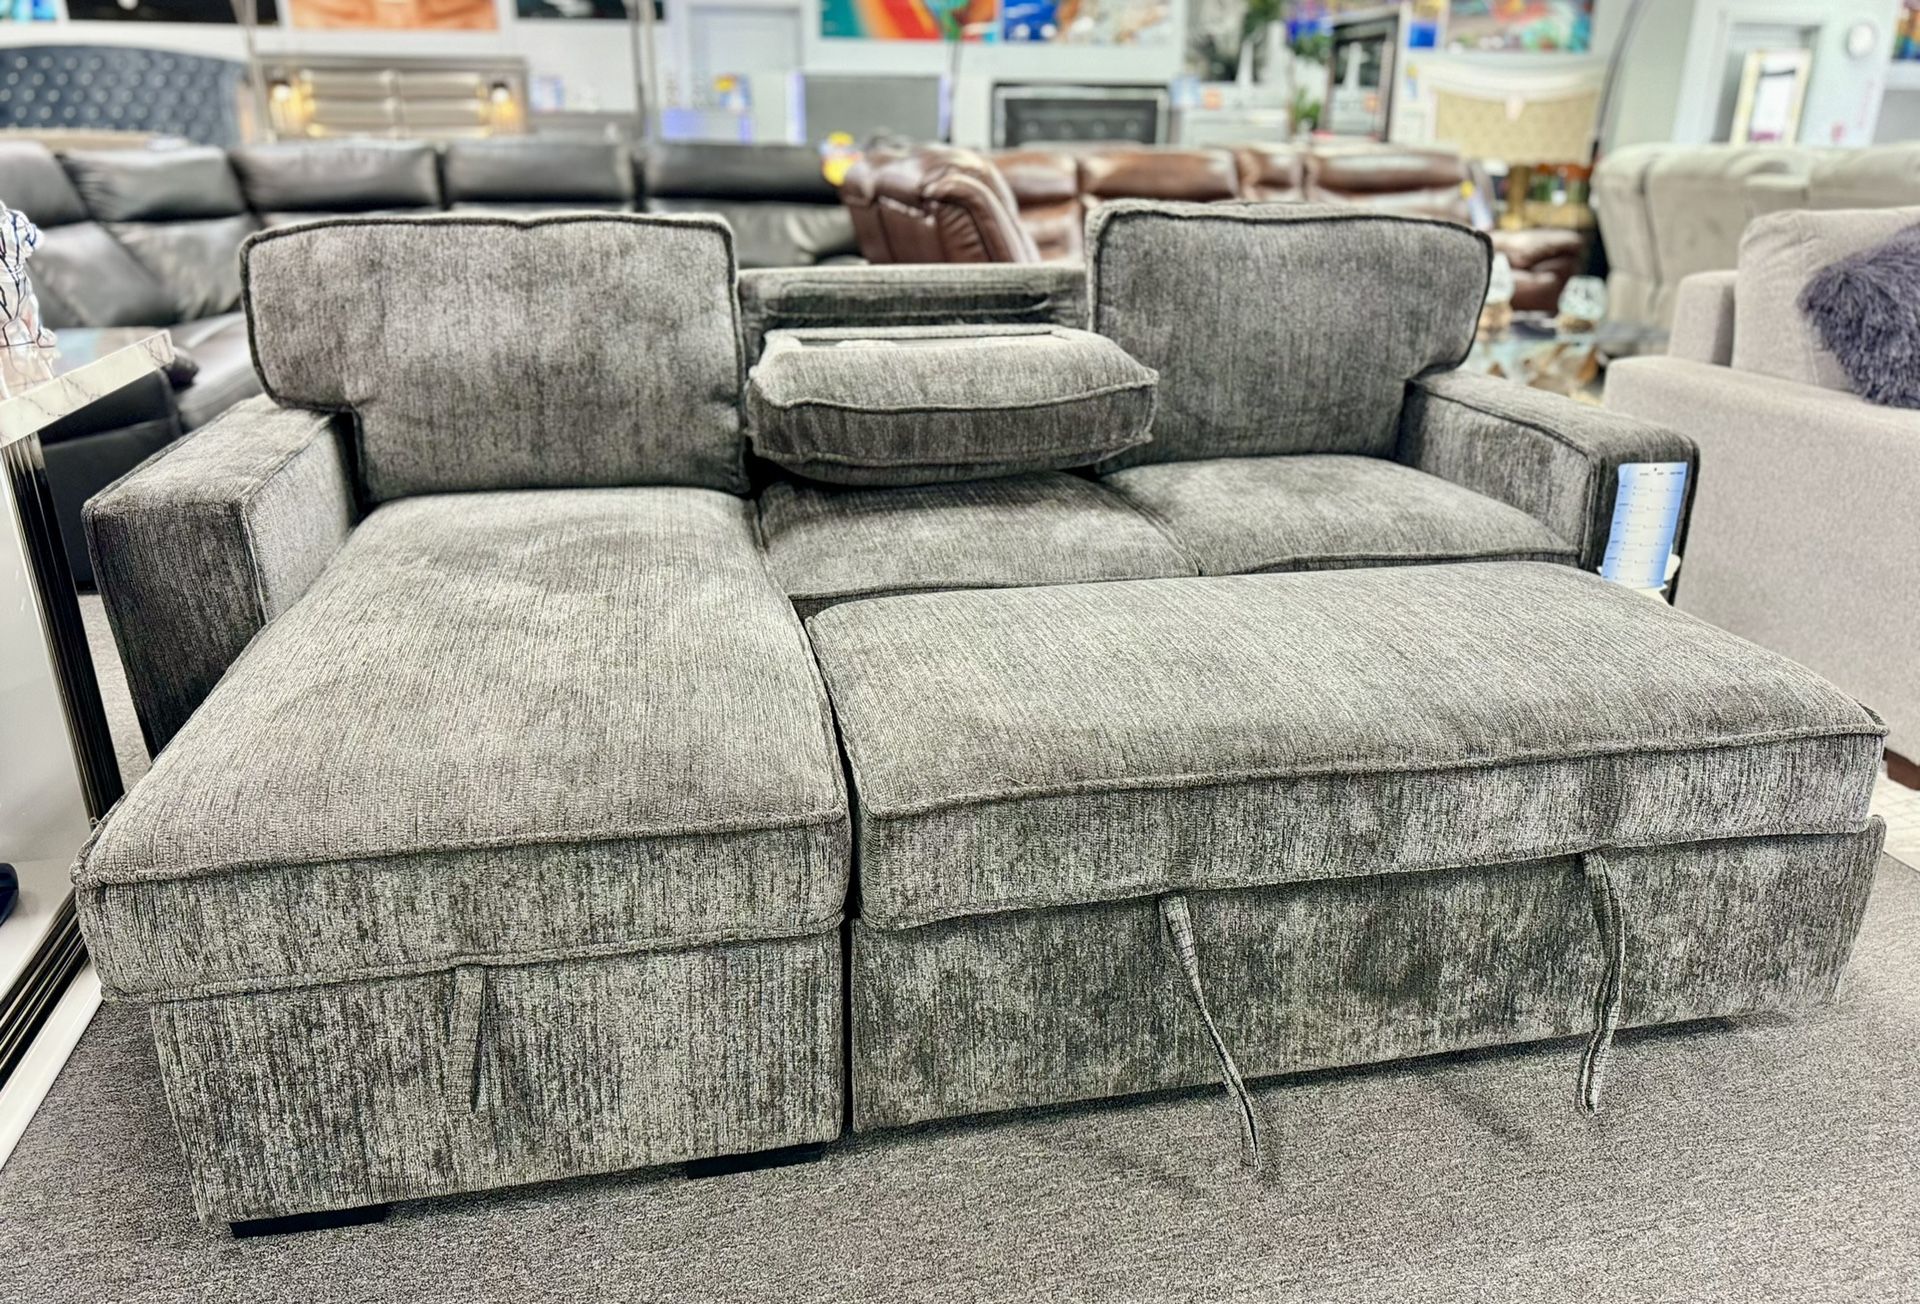 Overstock Sale Must Go🚨Beautiful Grey Pull Out Sleeper Sectional Furniture Amazing Deal $599 Overstock Sale Must Go🚨Beautiful Grey Pull Out Sleeper 